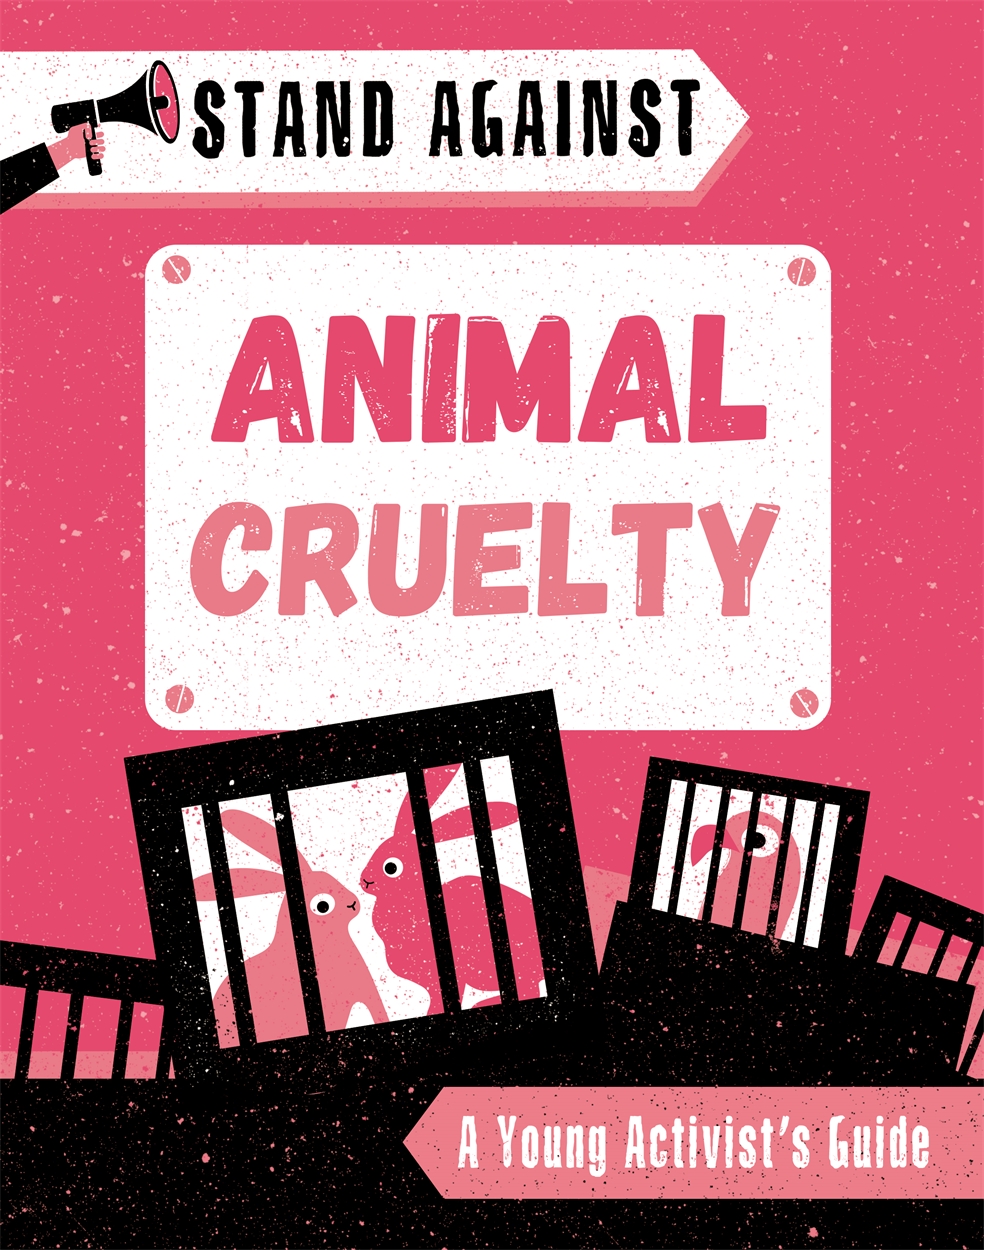 Stand Against: Animal Cruelty by Alice Harman | Hachette UK